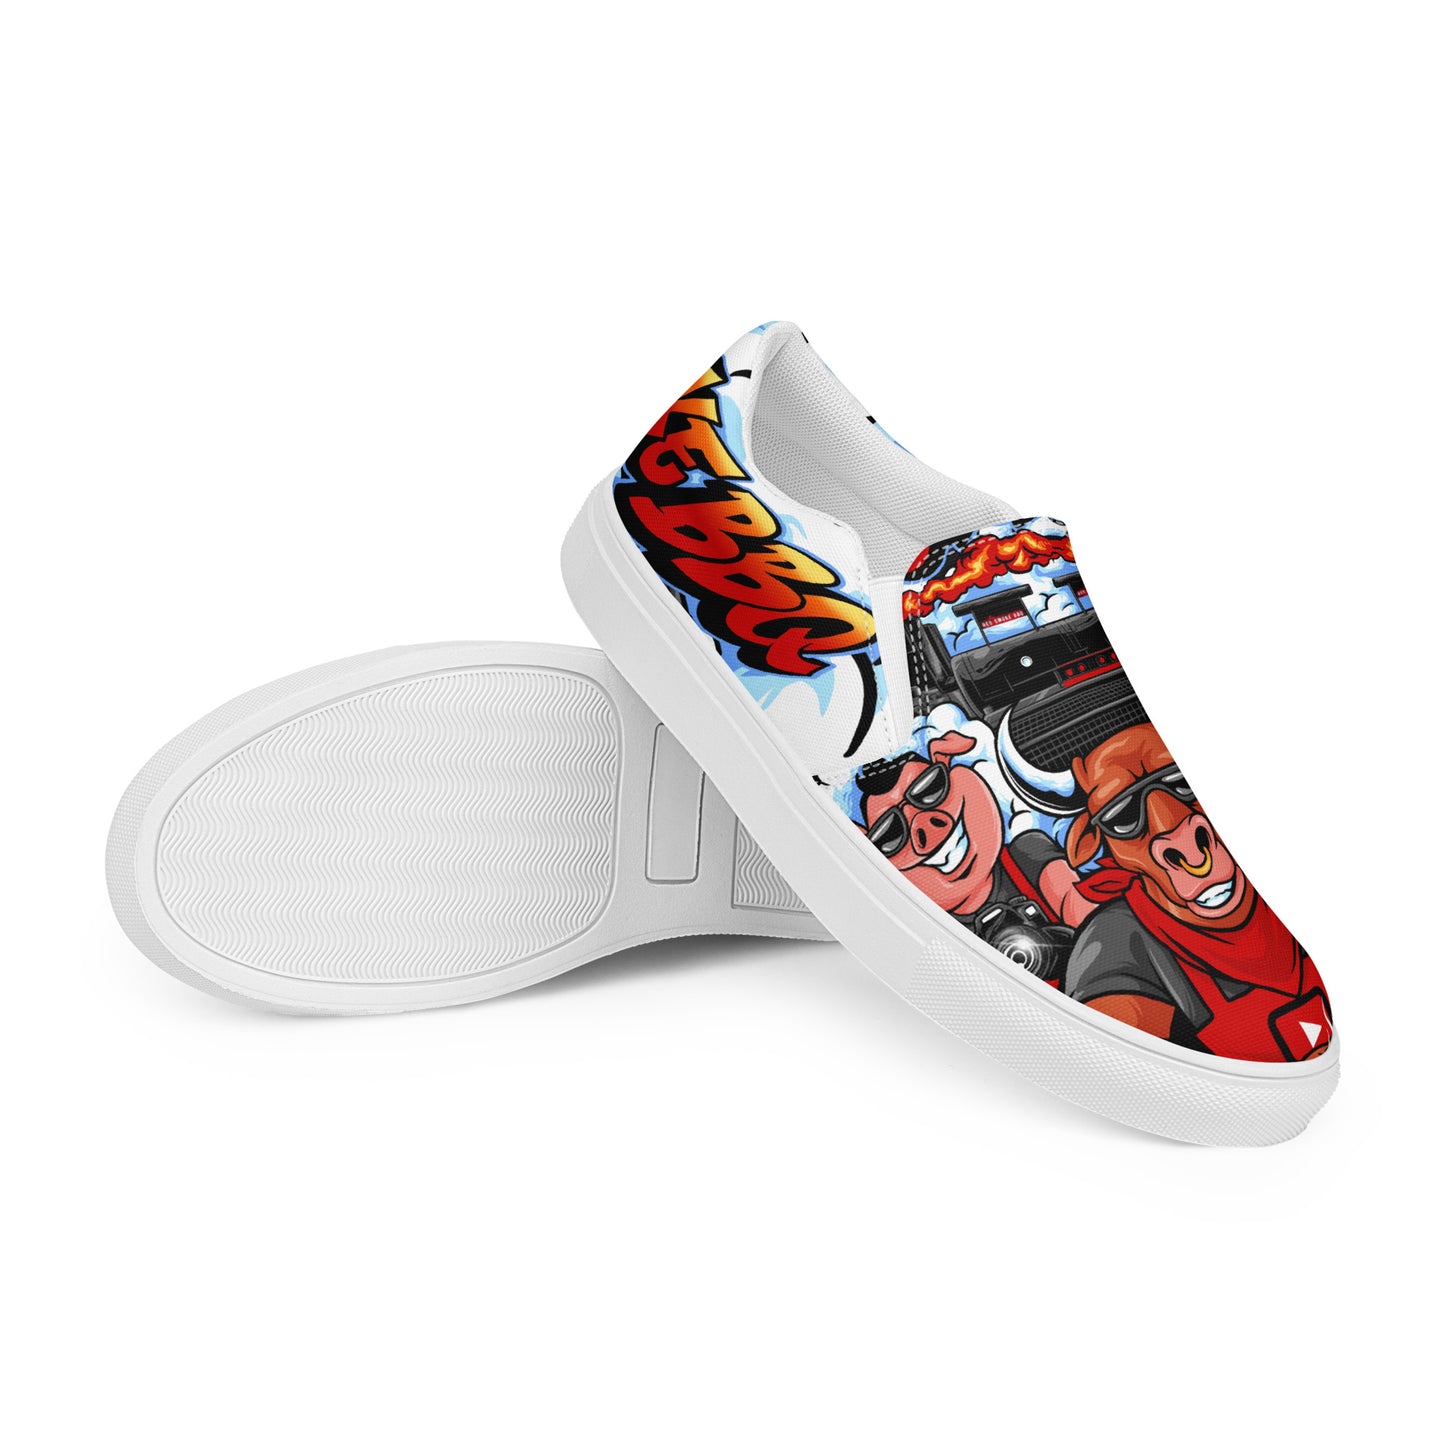 Men’s Red Smoke BarbeShoes slip-on canvas shoes